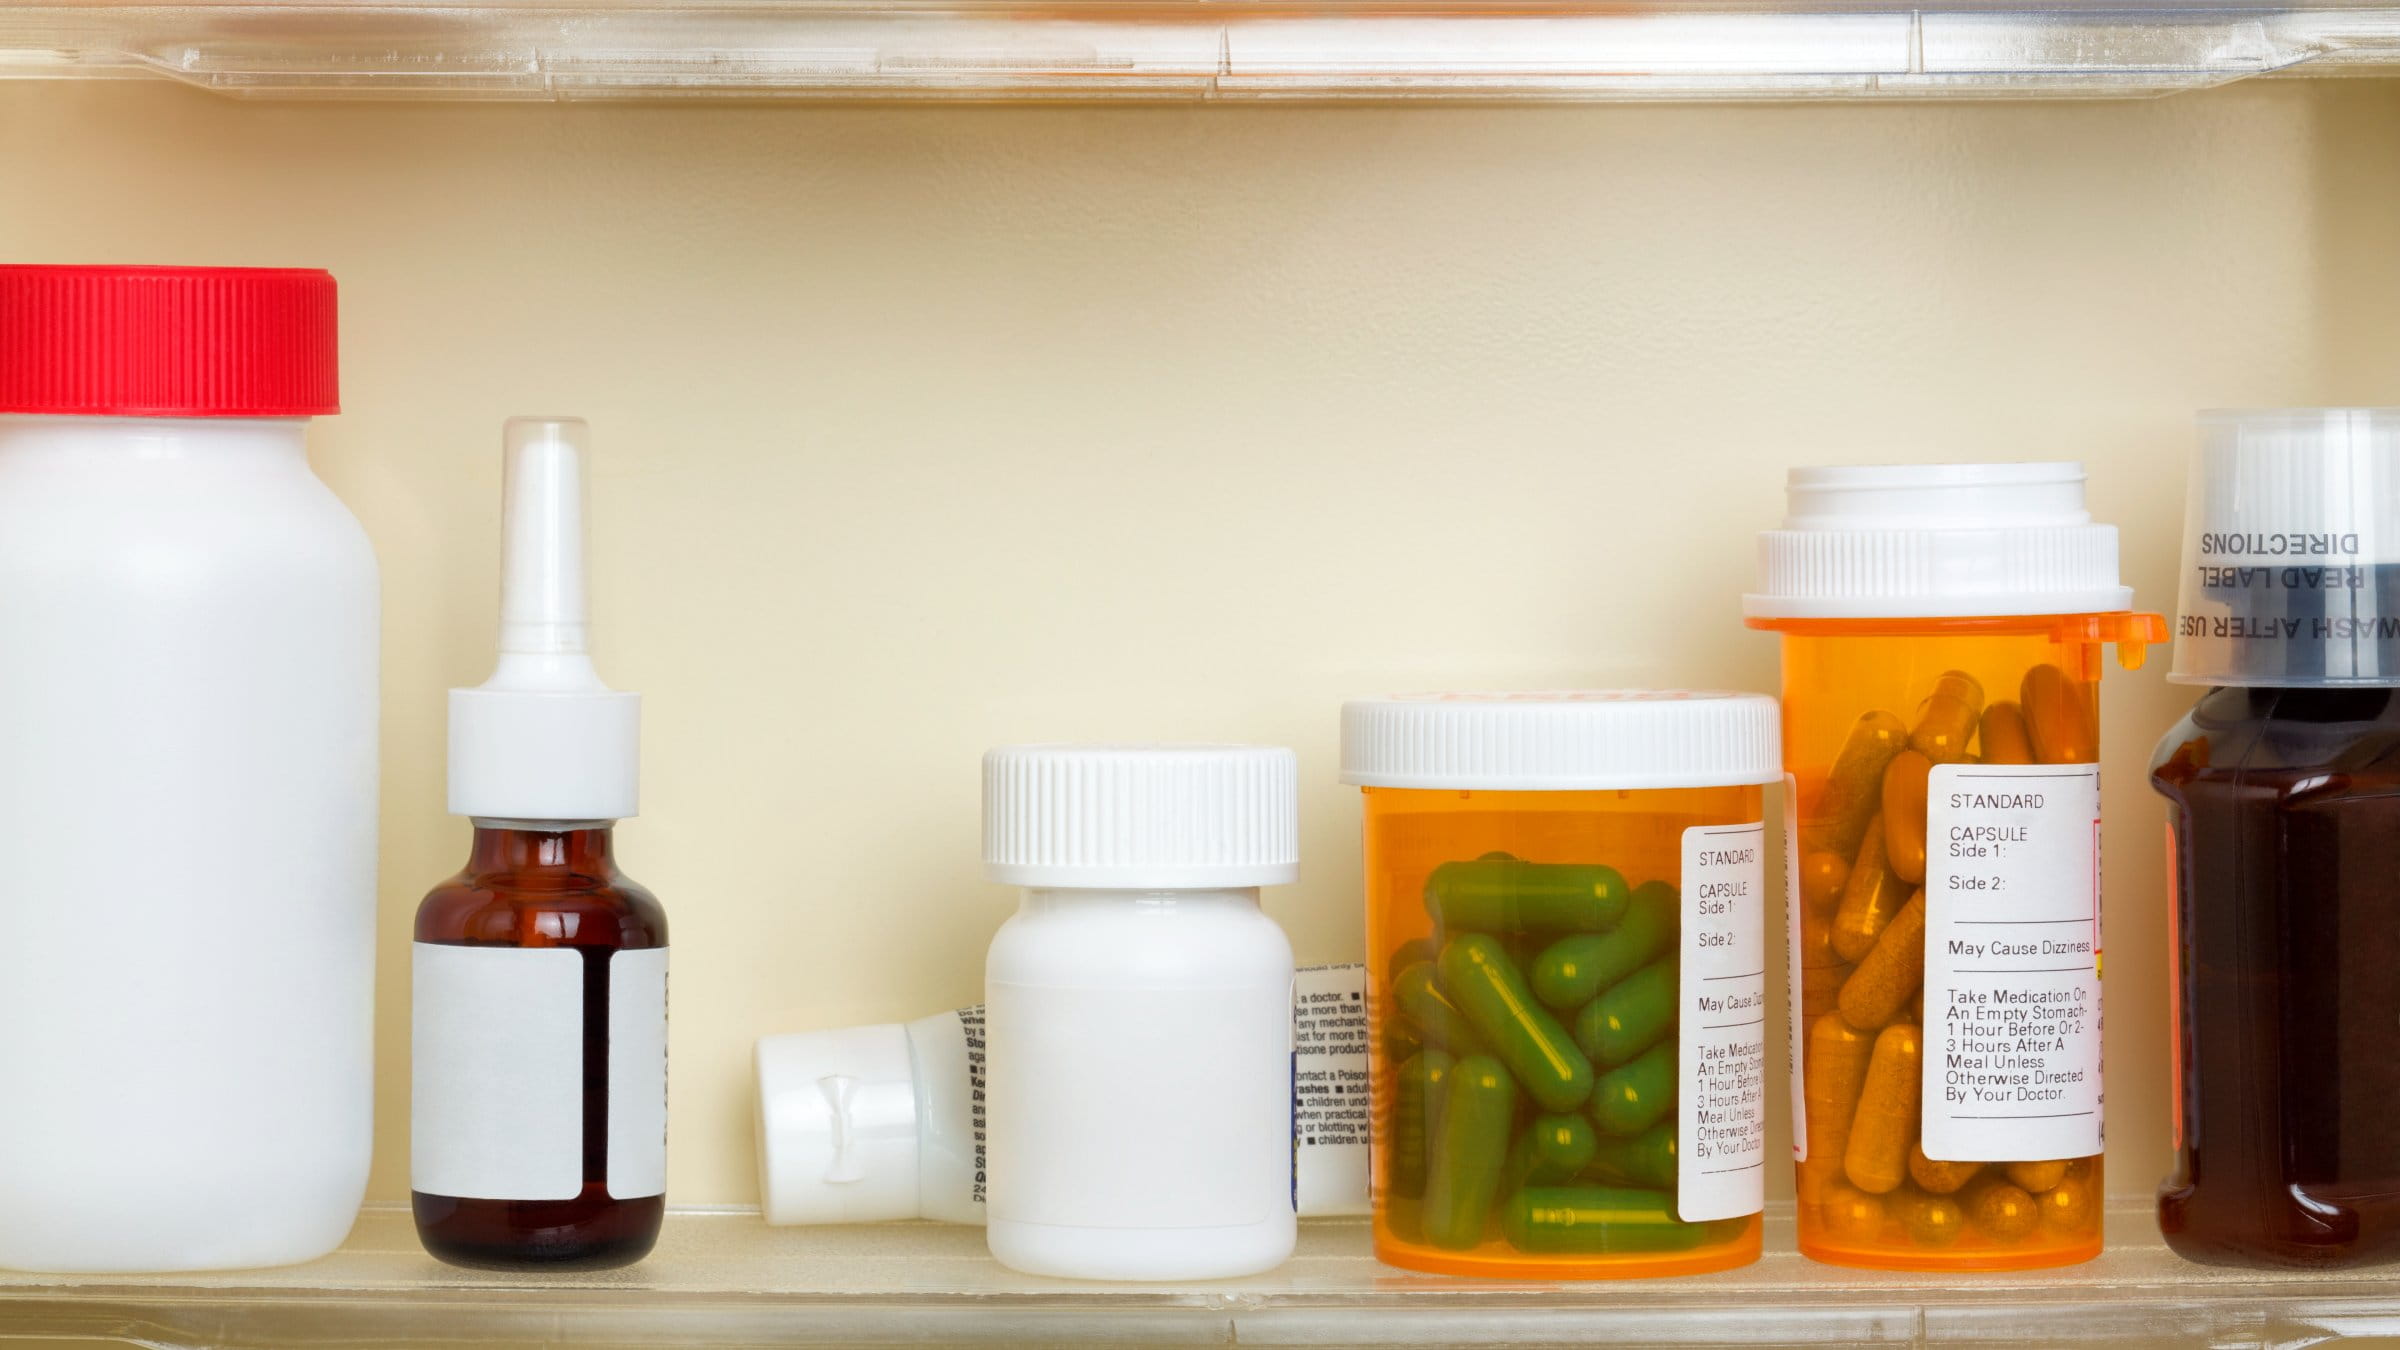 3 ways to safely throw away old medicine that’s unused or expired